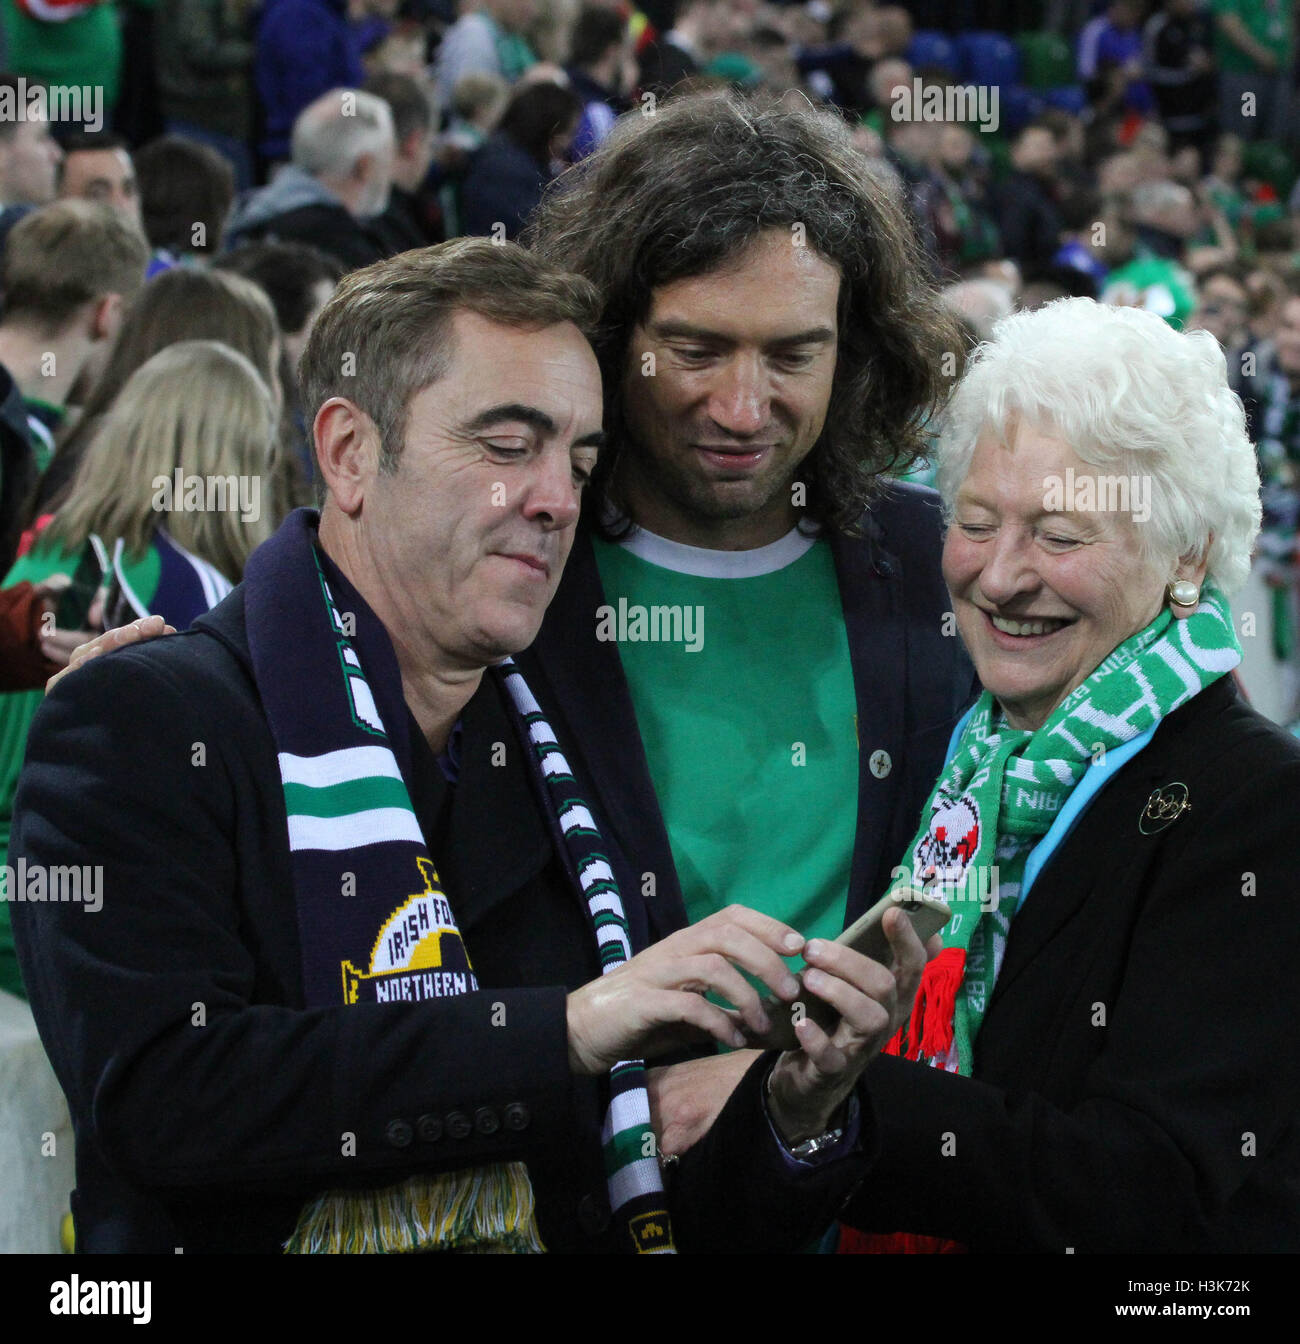 National Football Stadium at Windsor Park, Belfast, Northern Ireland.  08th October 2016. To mark the official opening of the National Football Stadium at Windsor Park in Belfast (the re-development of the old Windsor Park) a Lap of Northern Ireland Legends around the stadium took place. (L-r) Actor Jimmy Nesbitt, Snow Patrol's Gary Lightbody and Dame Mary Peters at the event. David Hunter/Alamy Live News. Stock Photo